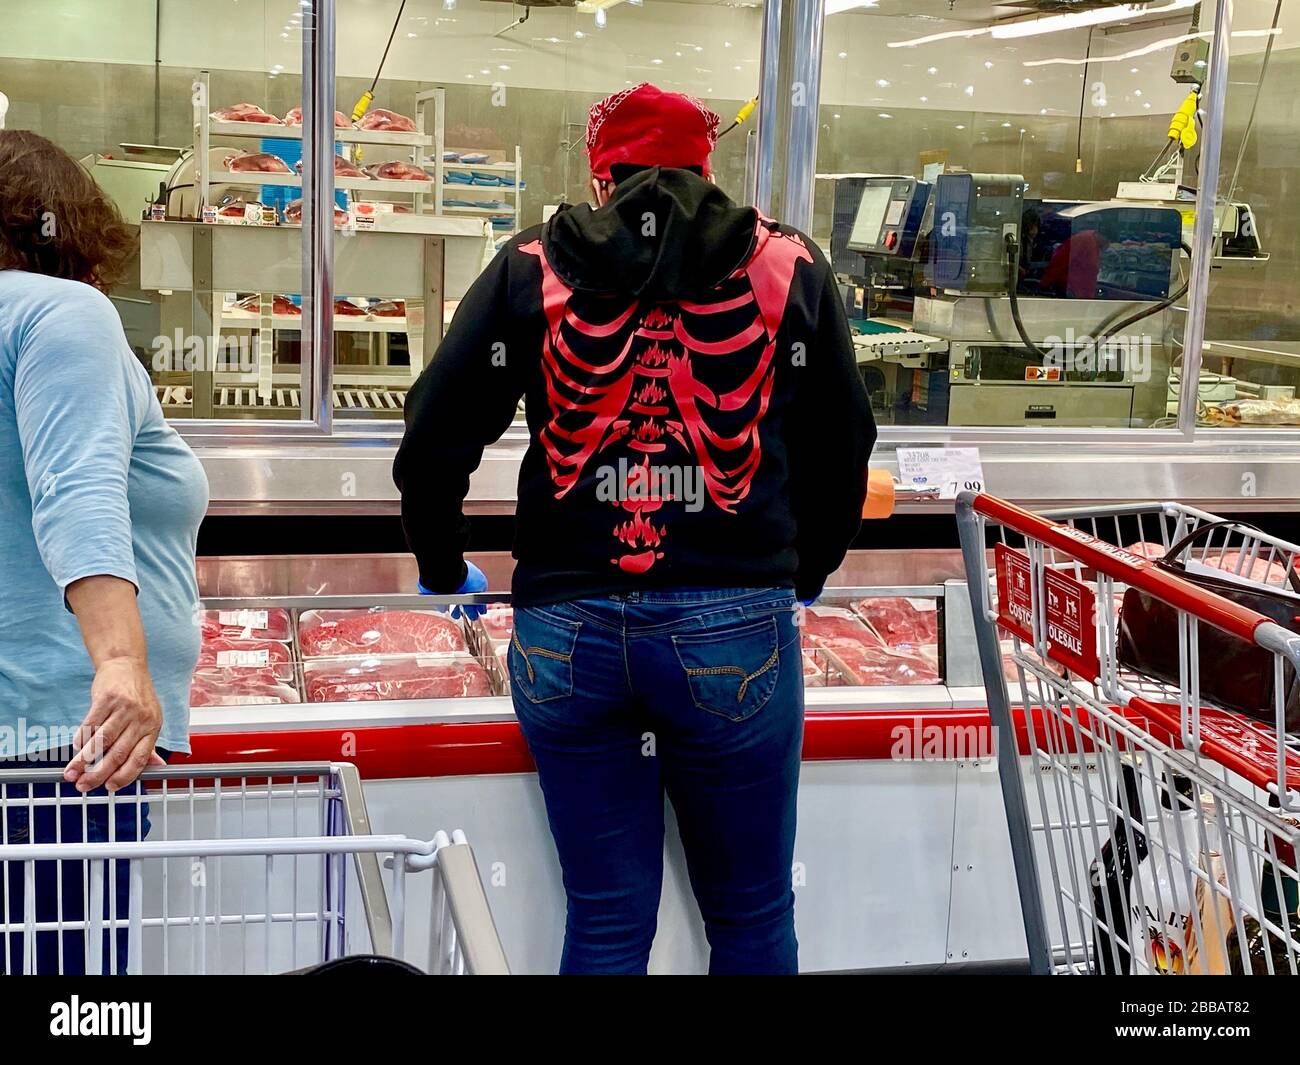 Santa Barbara, California, USA. 27th Mar, 2020. Panic Shopping during the Corona Virus pandemic: one woman at Costco wears a sweat shirt displaying a skeletonÃs lung area, which is oddly apropo given this is the part of the body that Covid-19 attacked. Credit: Amy Katz/ZUMA Wire/Alamy Live News Stock Photo